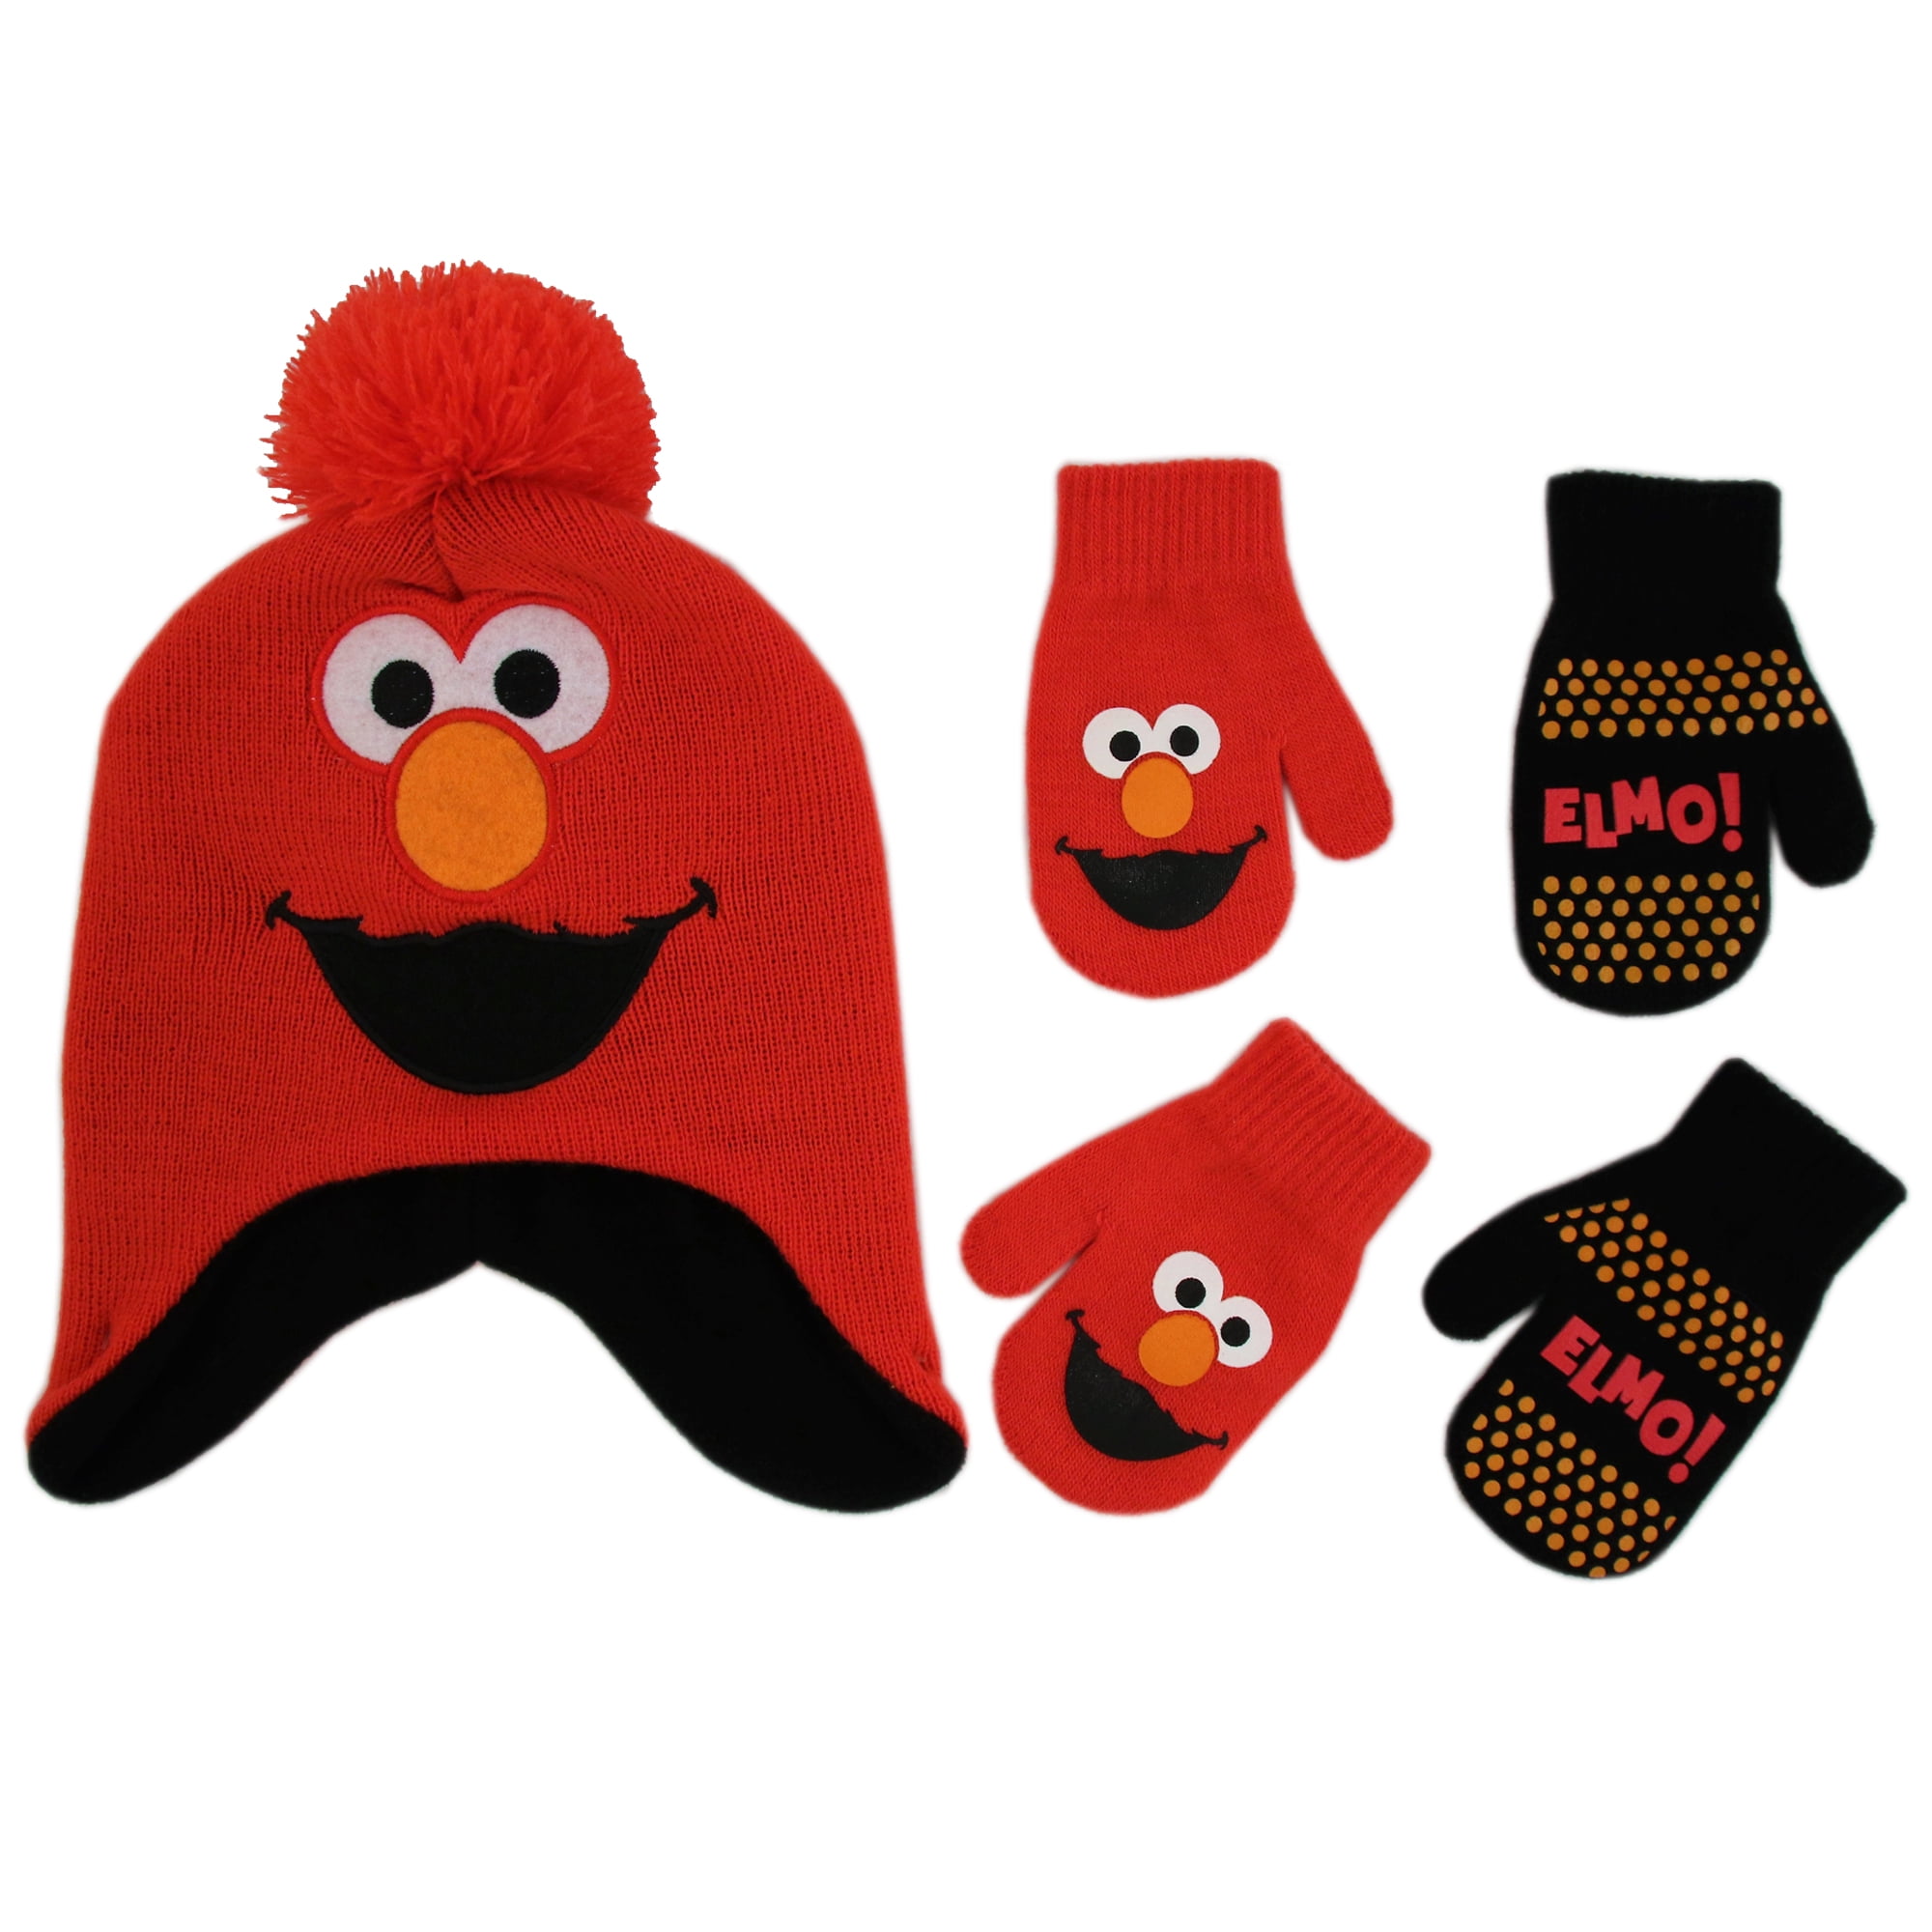 Grey/Red Sesame Street Elmo Scarf Hat and Mitten Set for Toddler Boys Age 2-4 